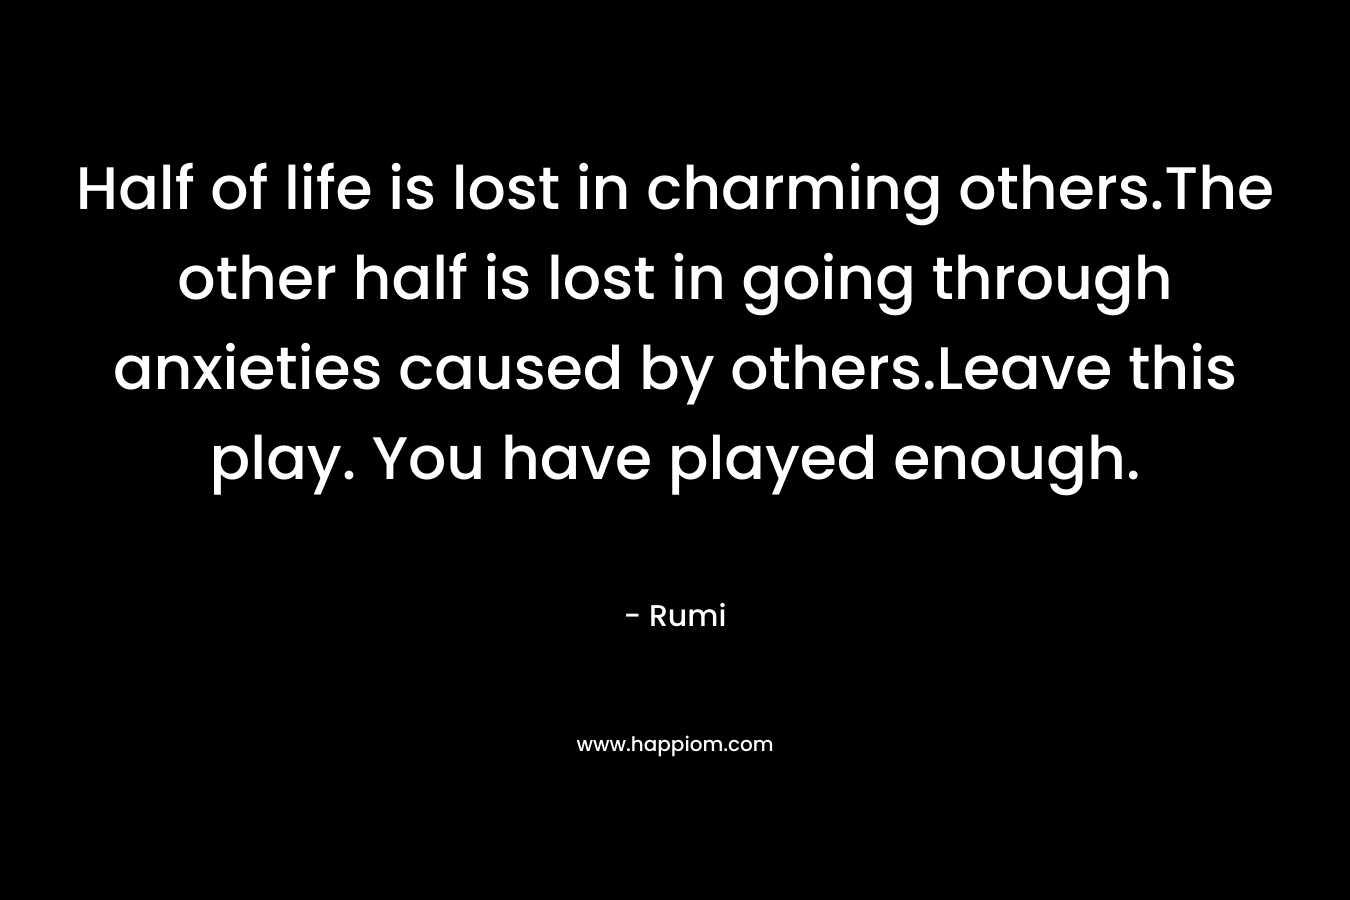 Half of life is lost in charming others.The other half is lost in going through anxieties caused by others.Leave this play. You have played enough. – Rumi